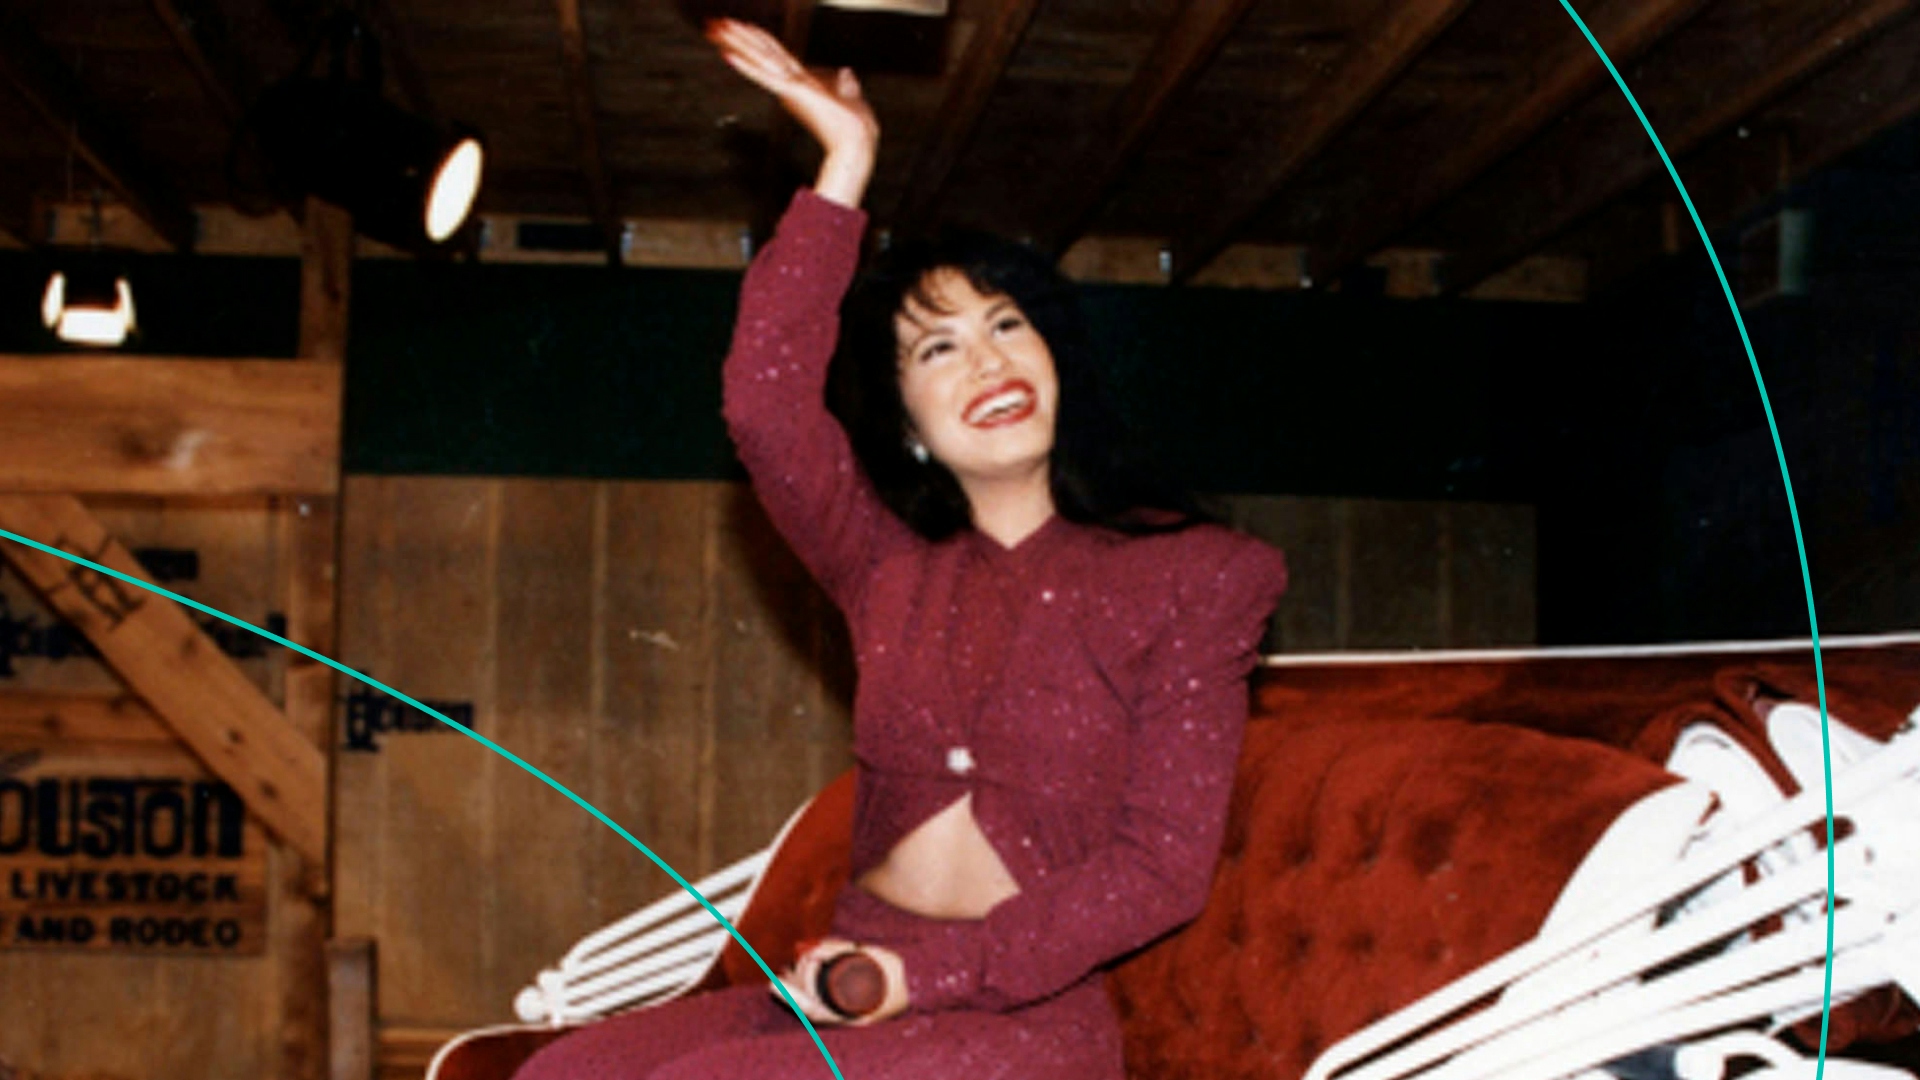 American singer Selena rides in a carriage during a 1995 performance 